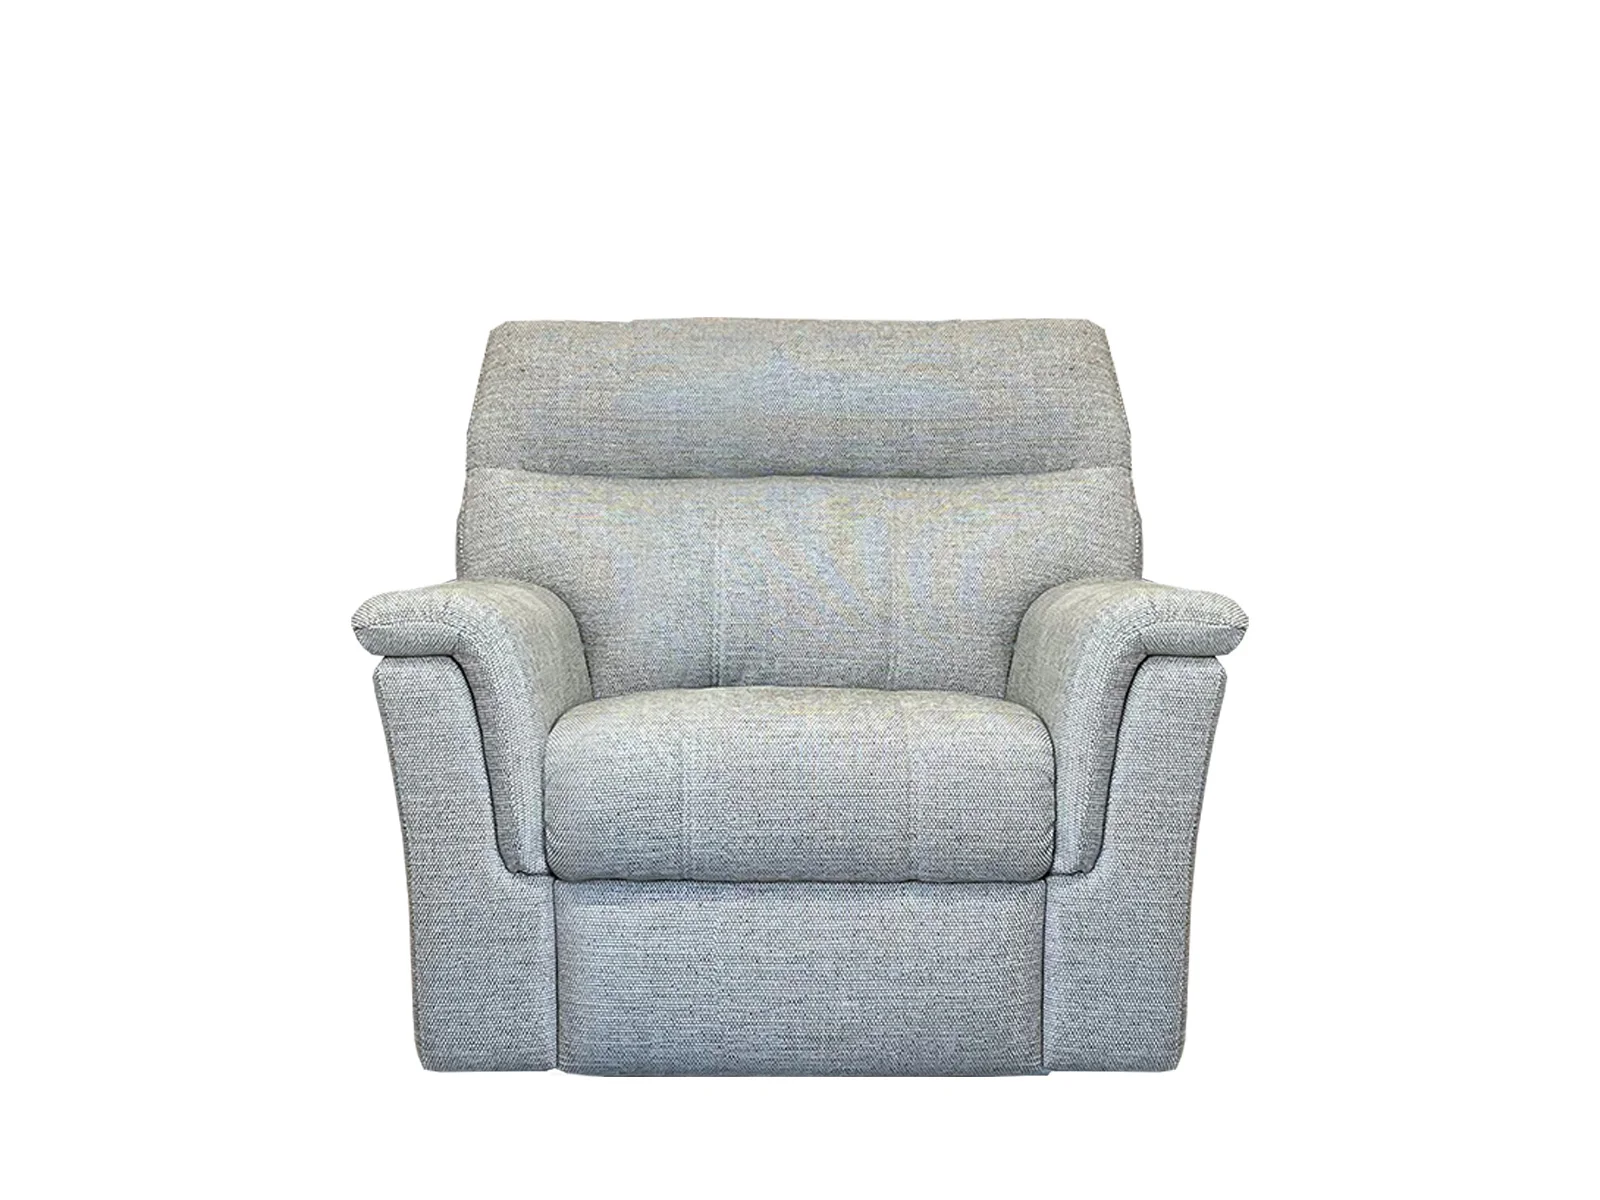 Power Recliner Chair With Adjustable Headrest And Lumbar Support